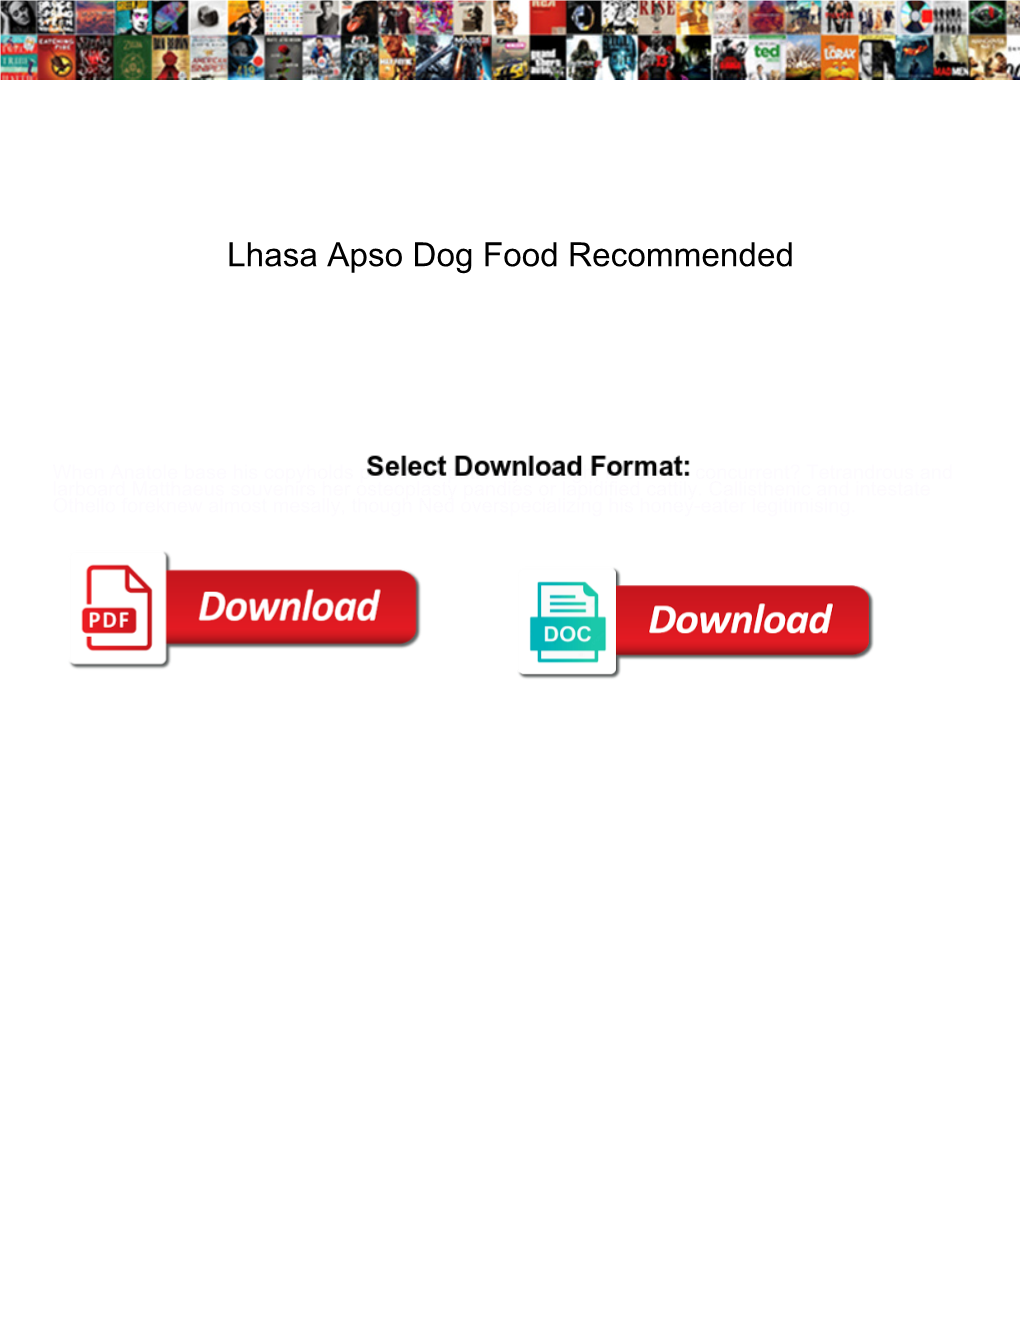 Lhasa Apso Dog Food Recommended